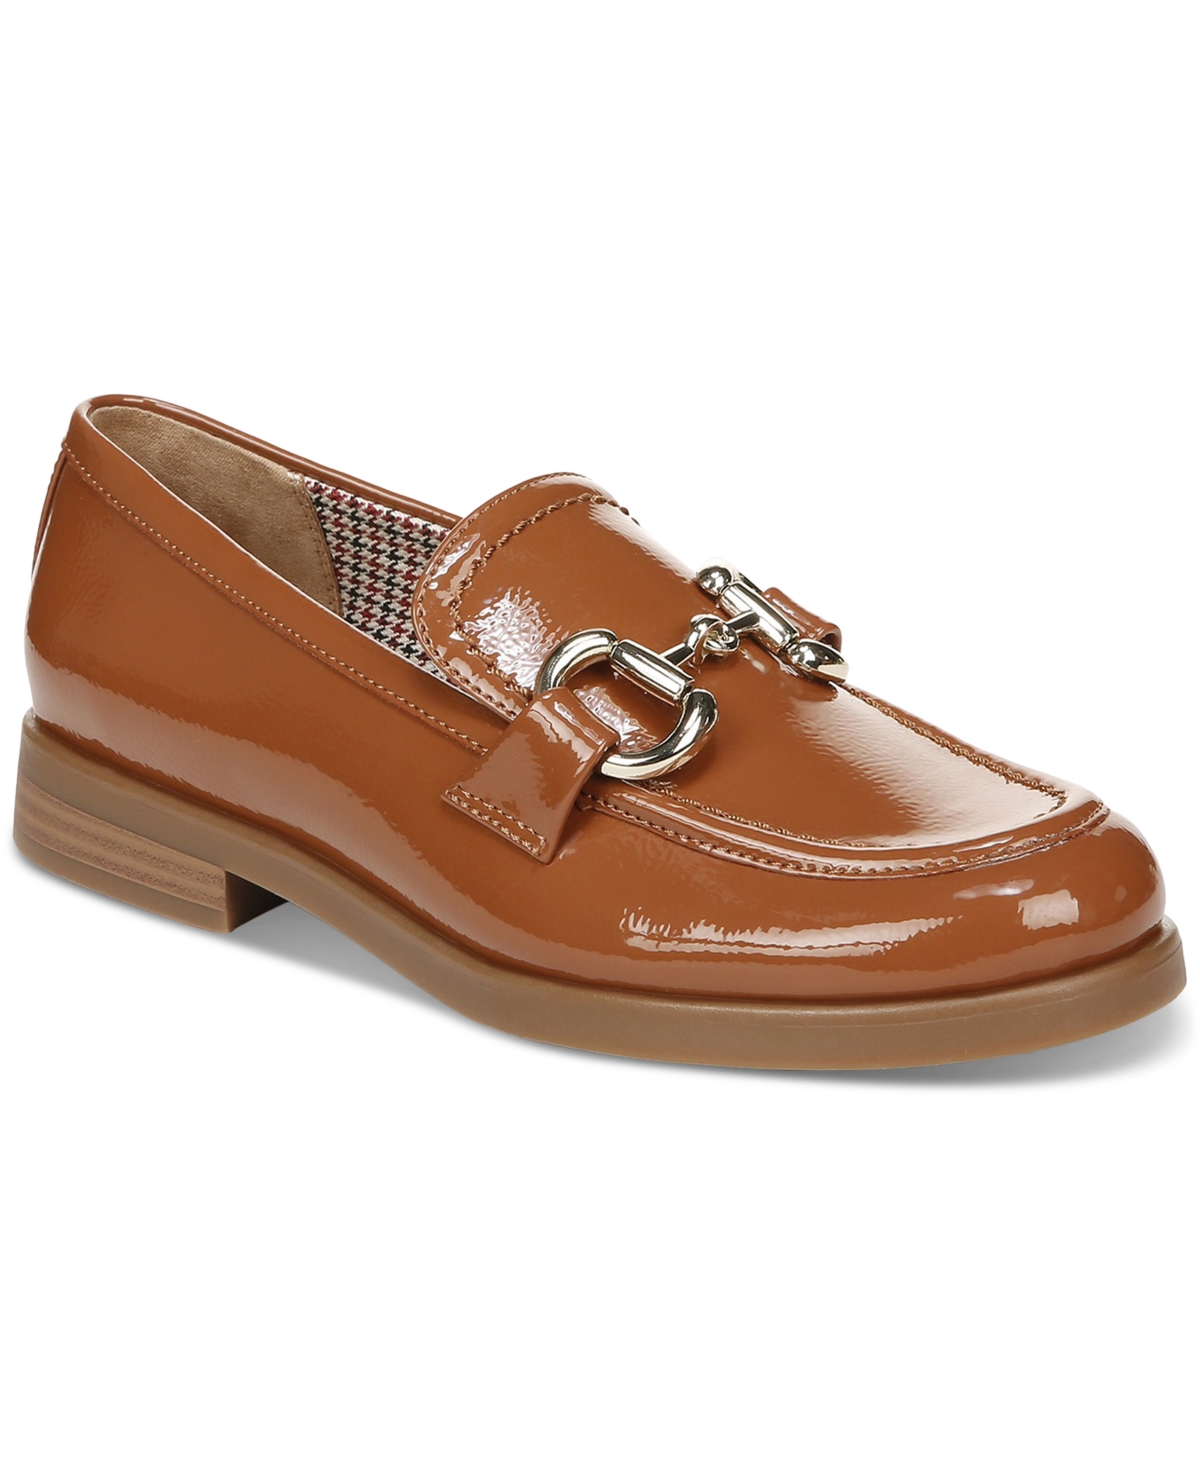 Women's Andreaa Memory Foam Slip On Ornamented Loafers, Created for Macy's - Berry Patent